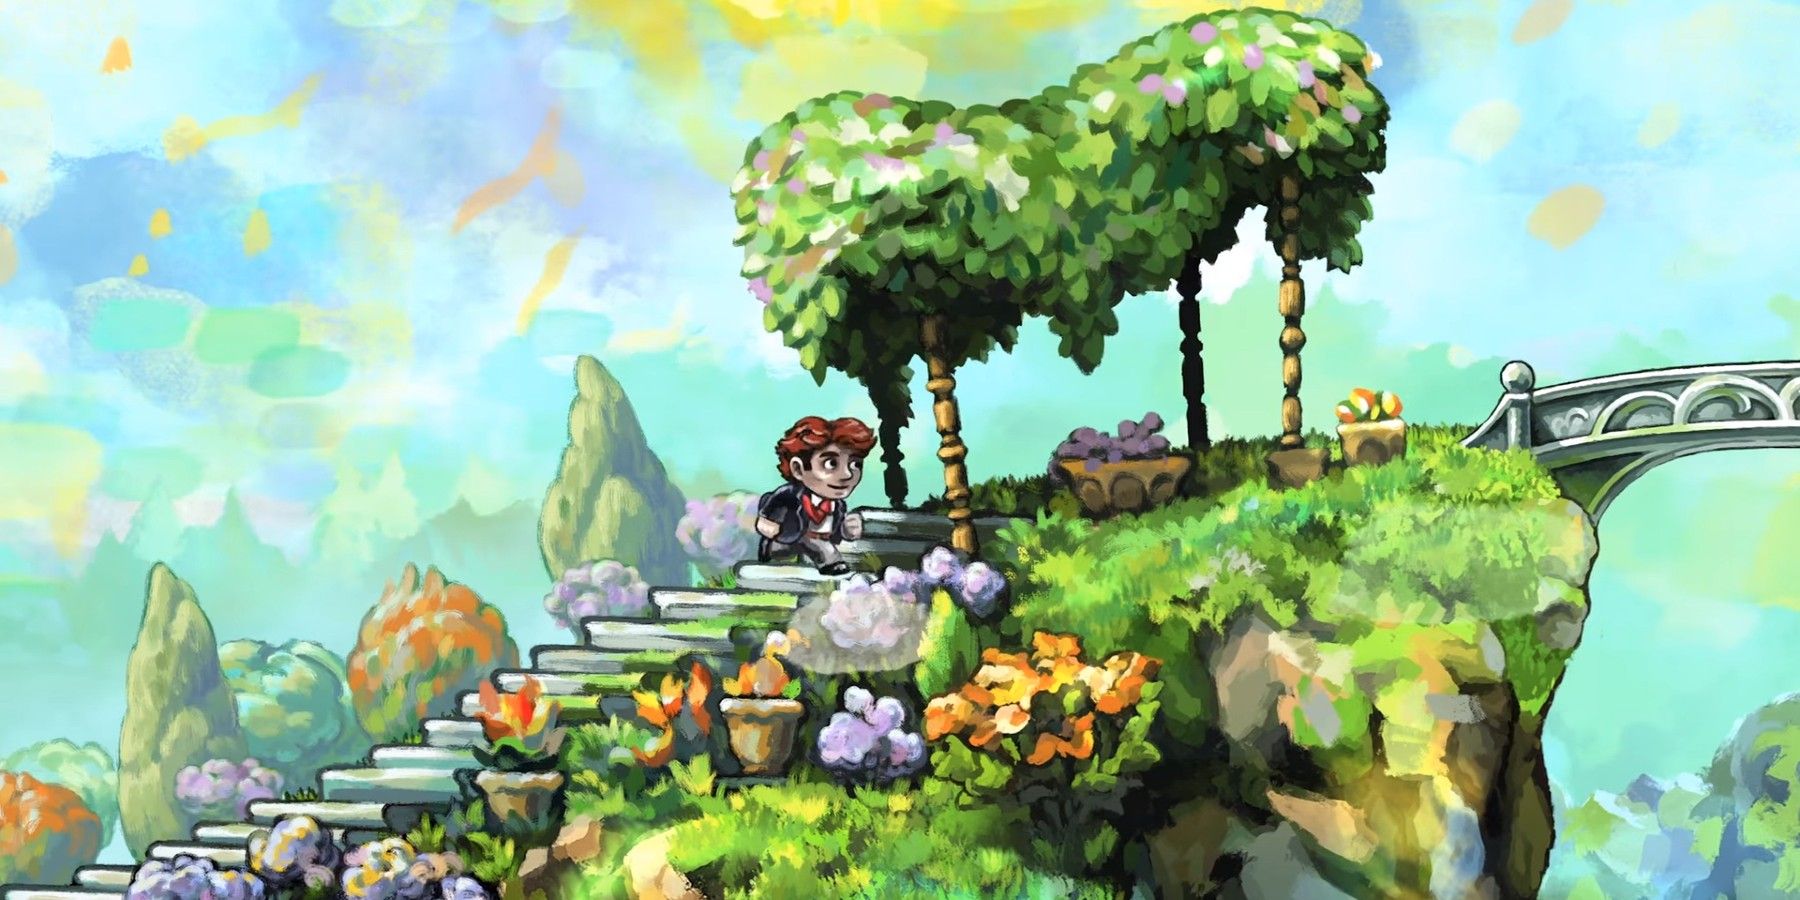 Revisiting 'Braid', the Indie Video Game That Set the Industry